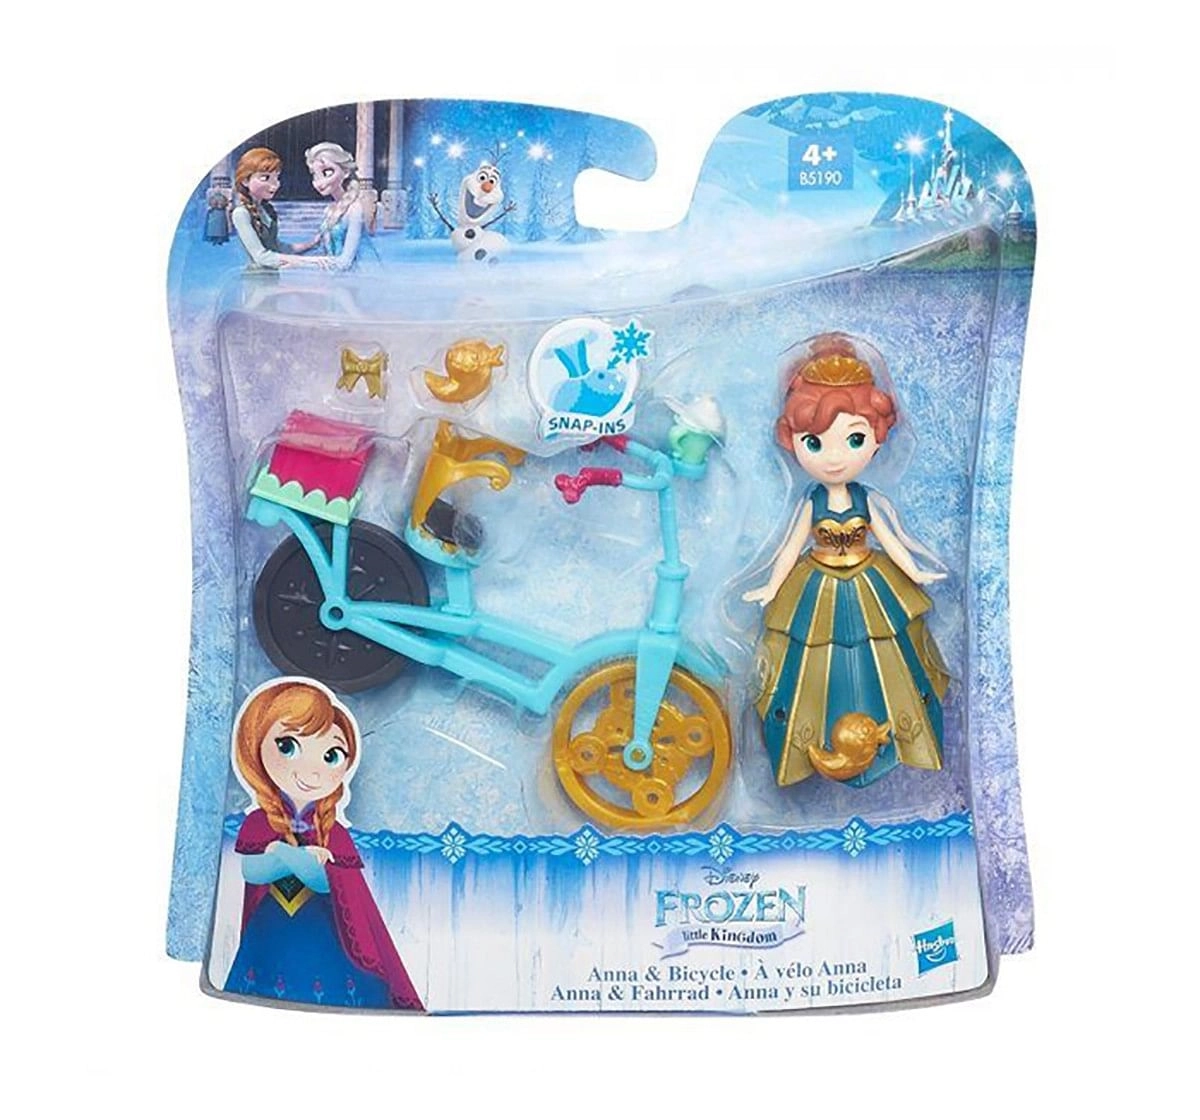 Disney Frozen Little Kingdom Doll And Accessory Assorted Dolls & Accessories for Girls age 4Y+ 